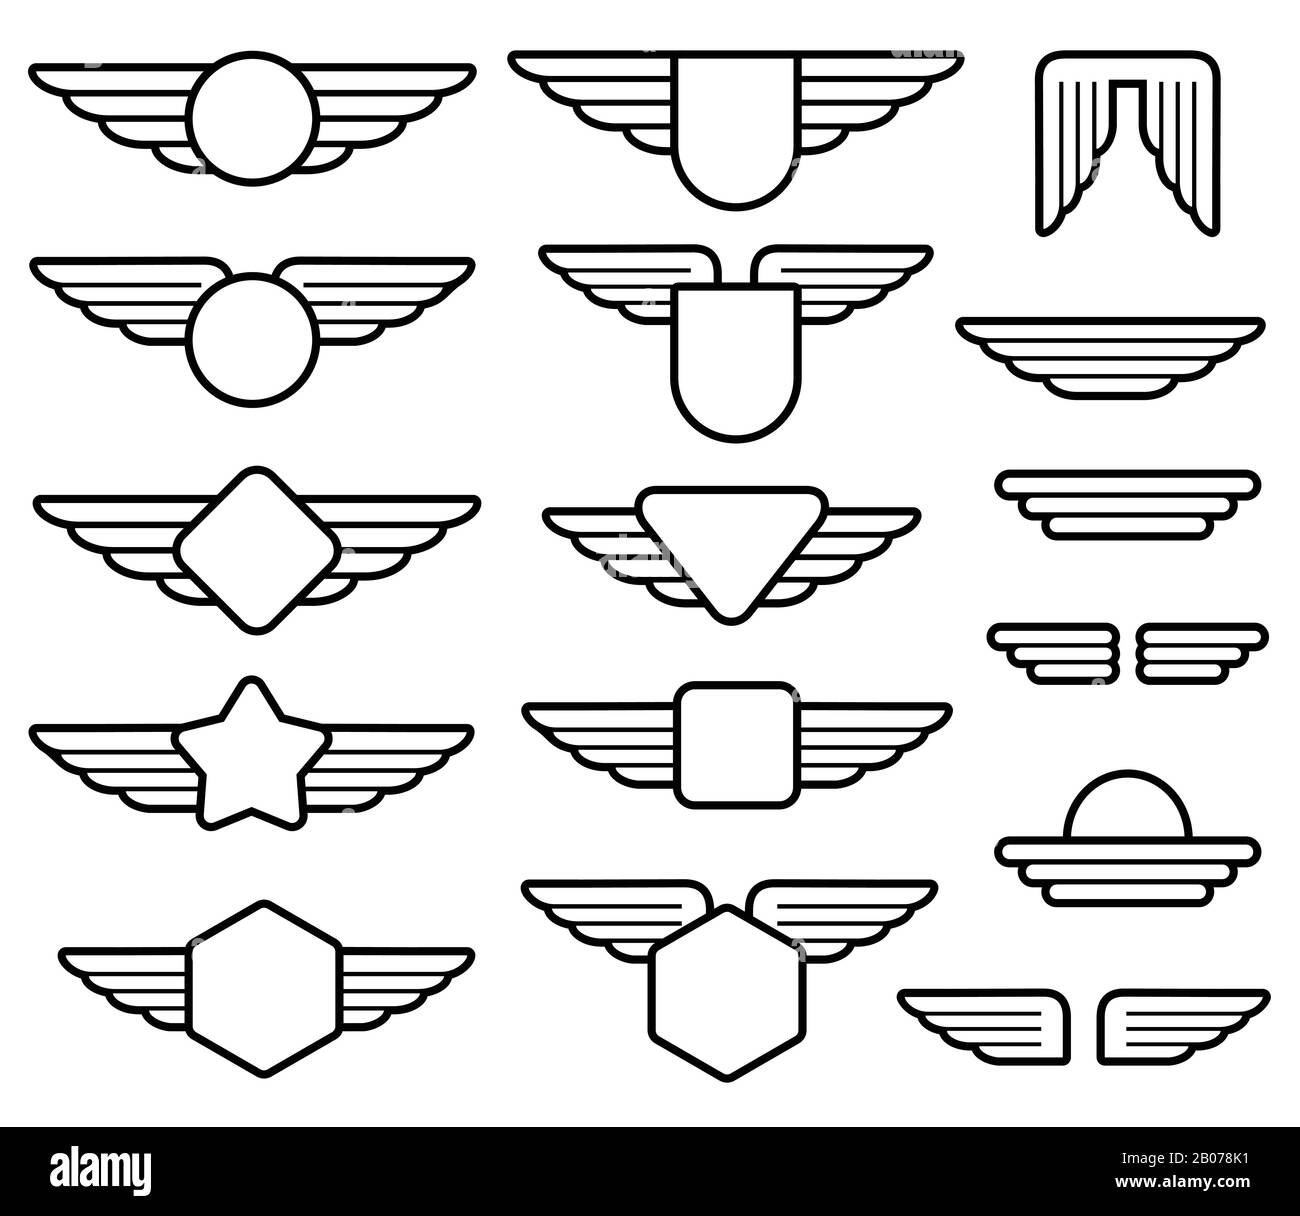 Wing army emblems, aviation badges, pilot labels line vector set. Shield with wings insignia illustration Stock Vector